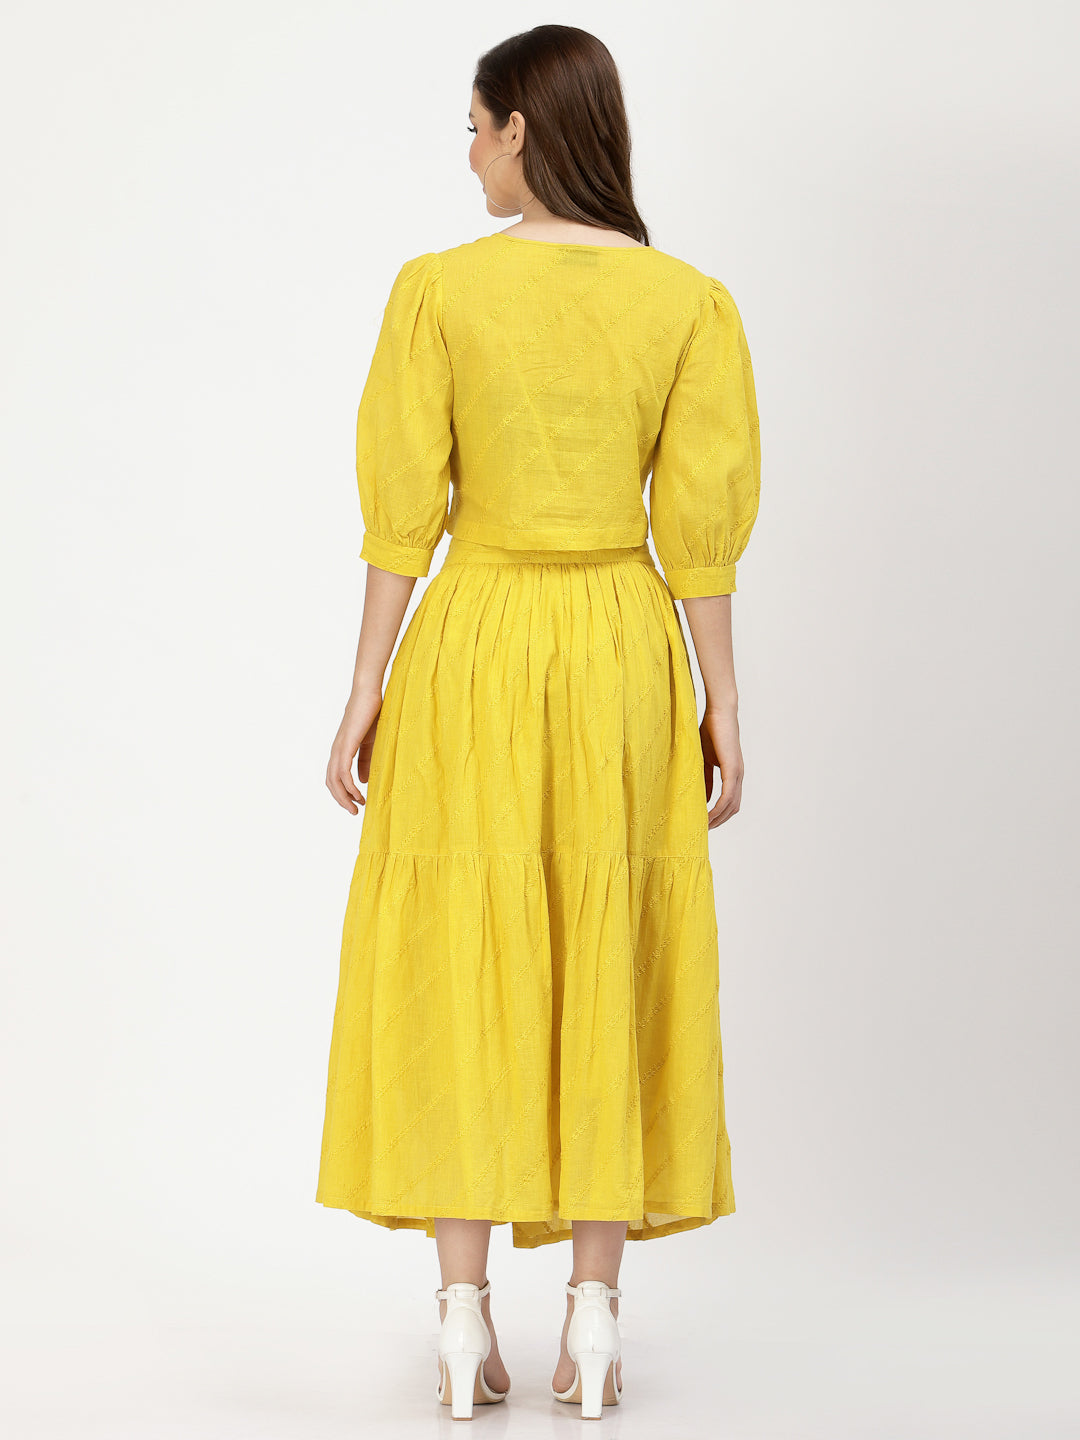 Terquois Yellow and Blue Self-Design Casual Skirt-Top with gathers Coordinate Sets TERQUOIS   